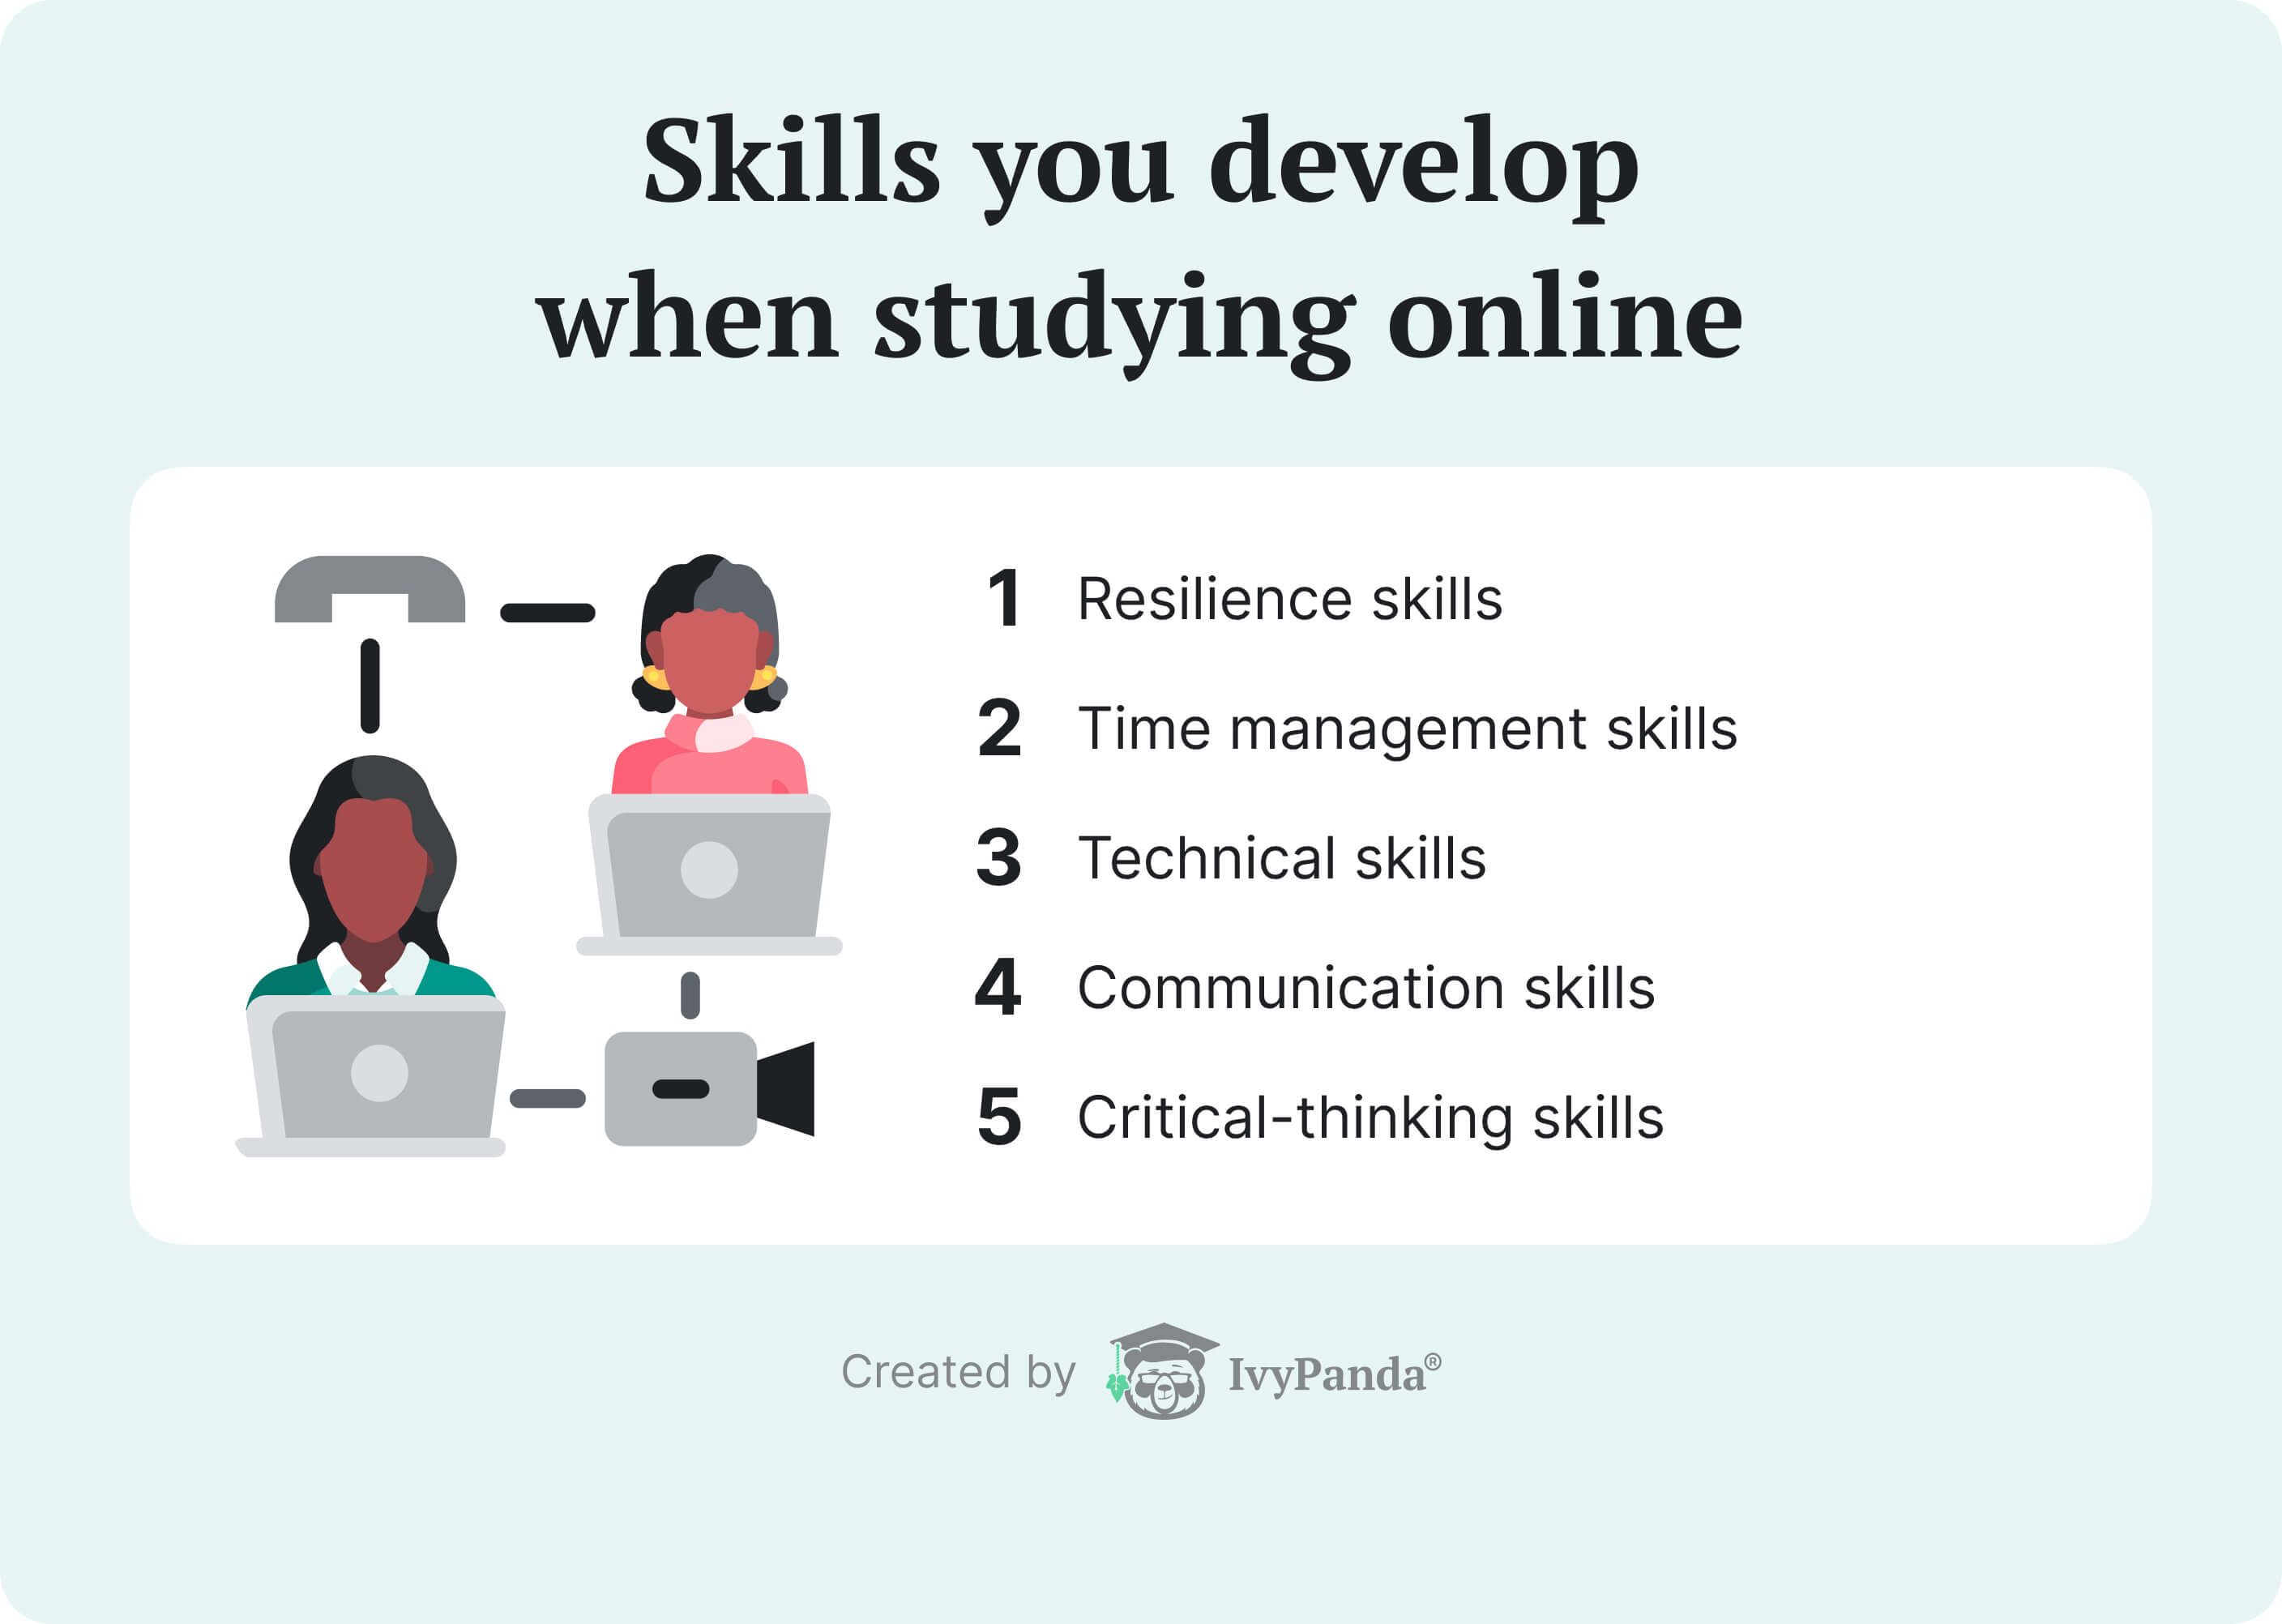 Skills you develop when studying online.